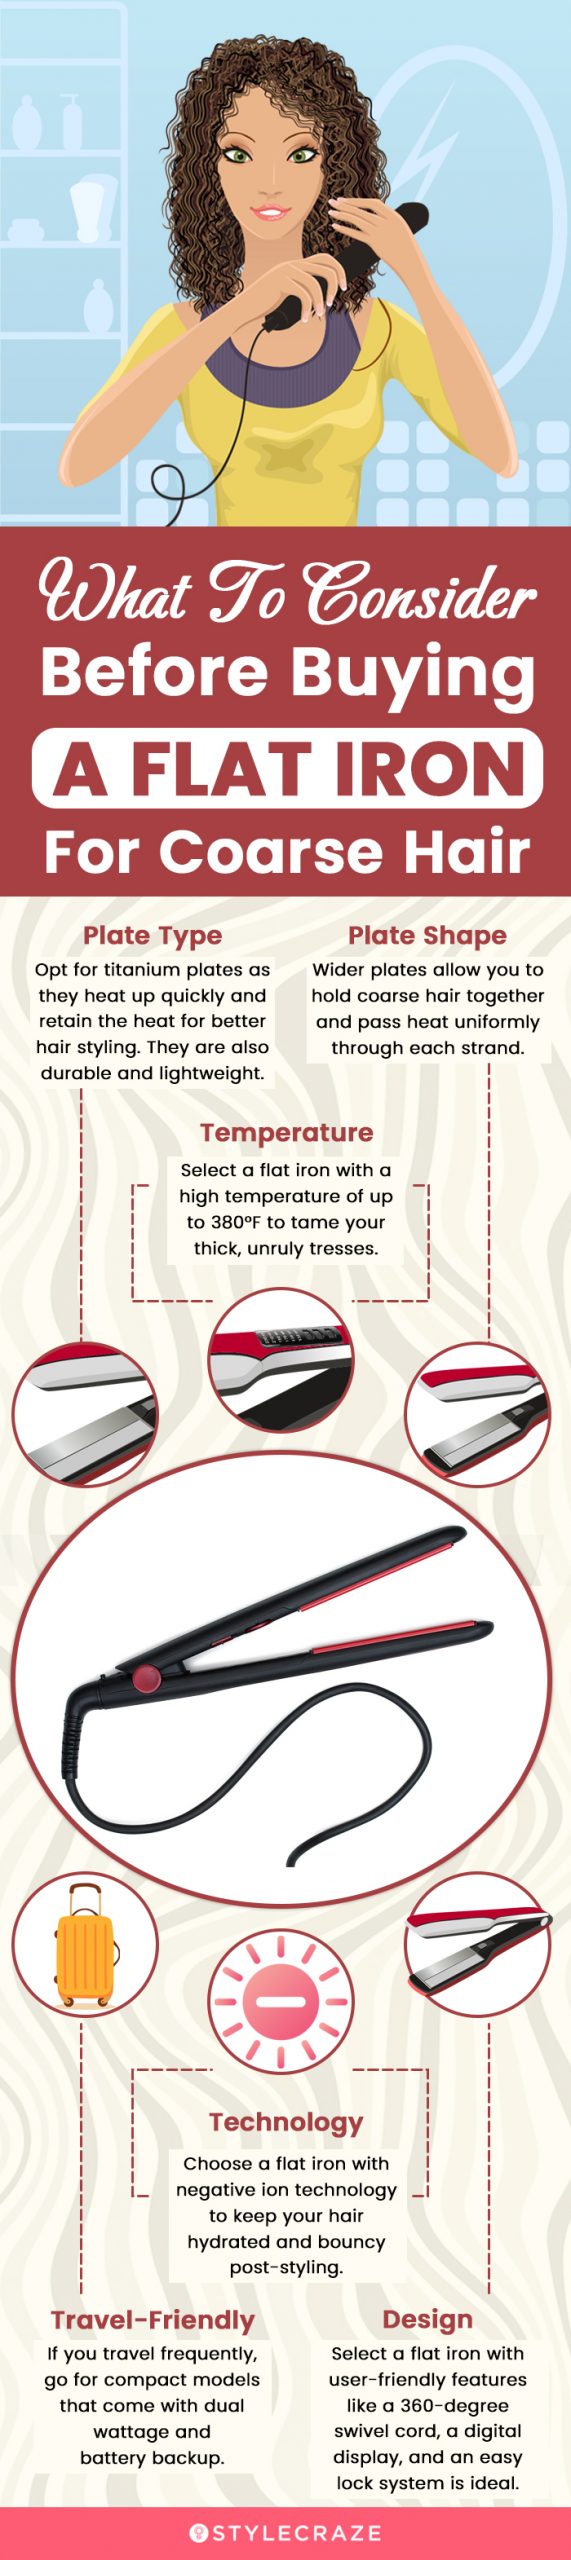 What To Consider Before Buying A Flat Iron For Coarse Hair (infographic)